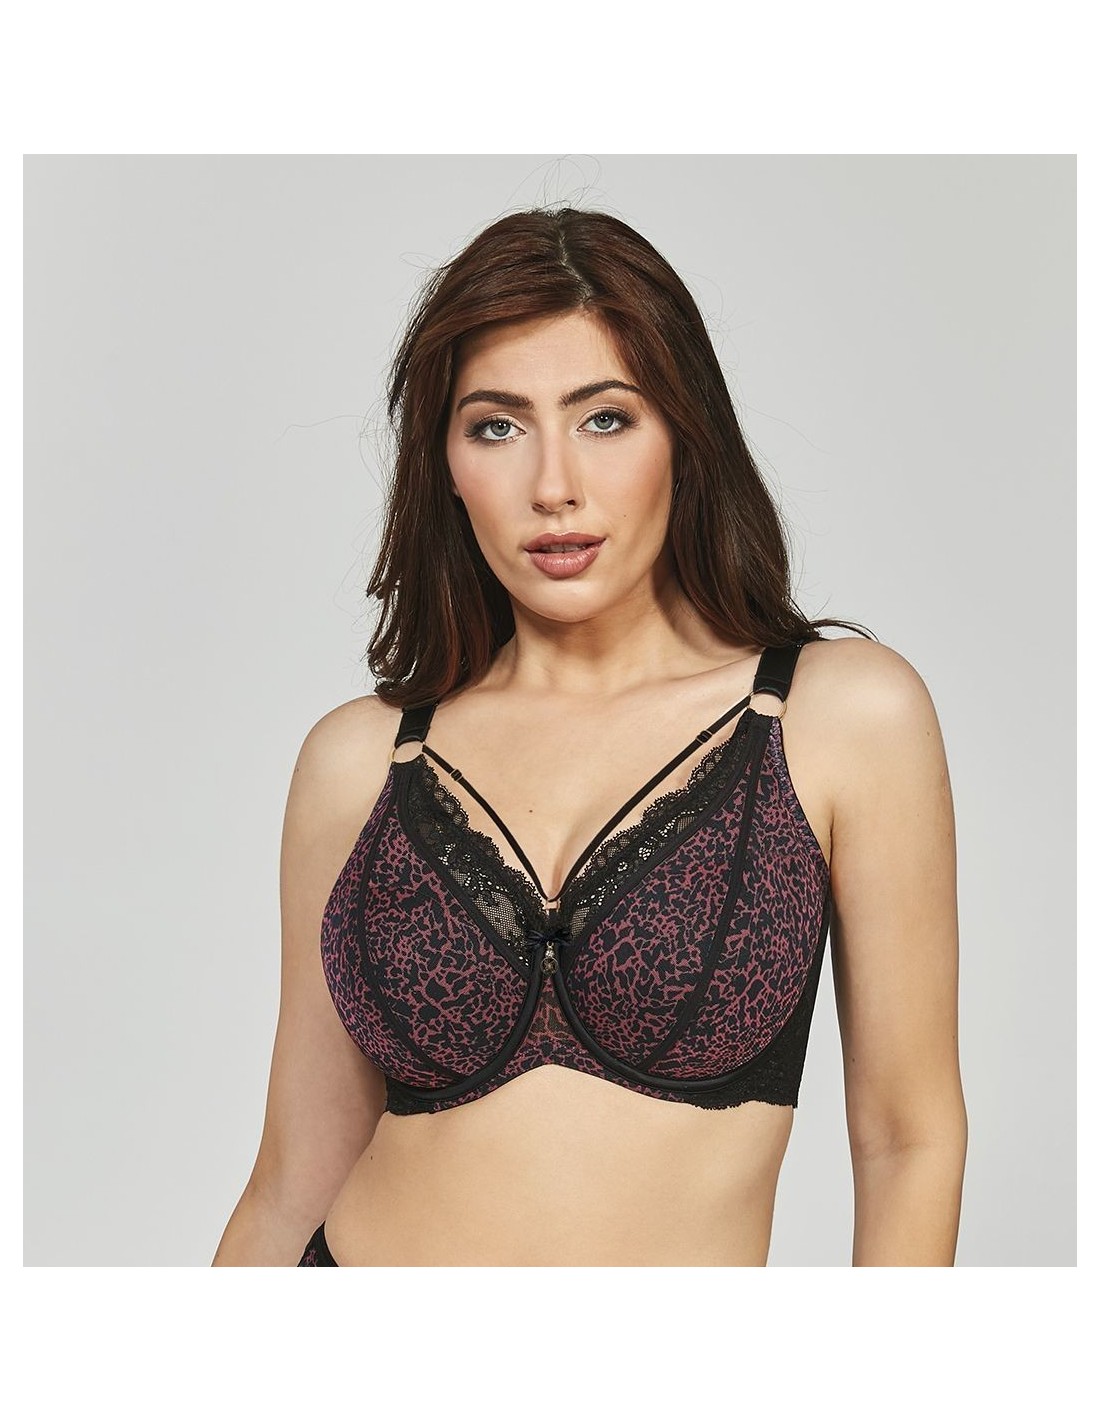 https://curvyvanitose.it/25389-thickbox_default/bra-plus-sizes-bralette-with-lace-and-effect-push-up-krisline-noemi.jpg